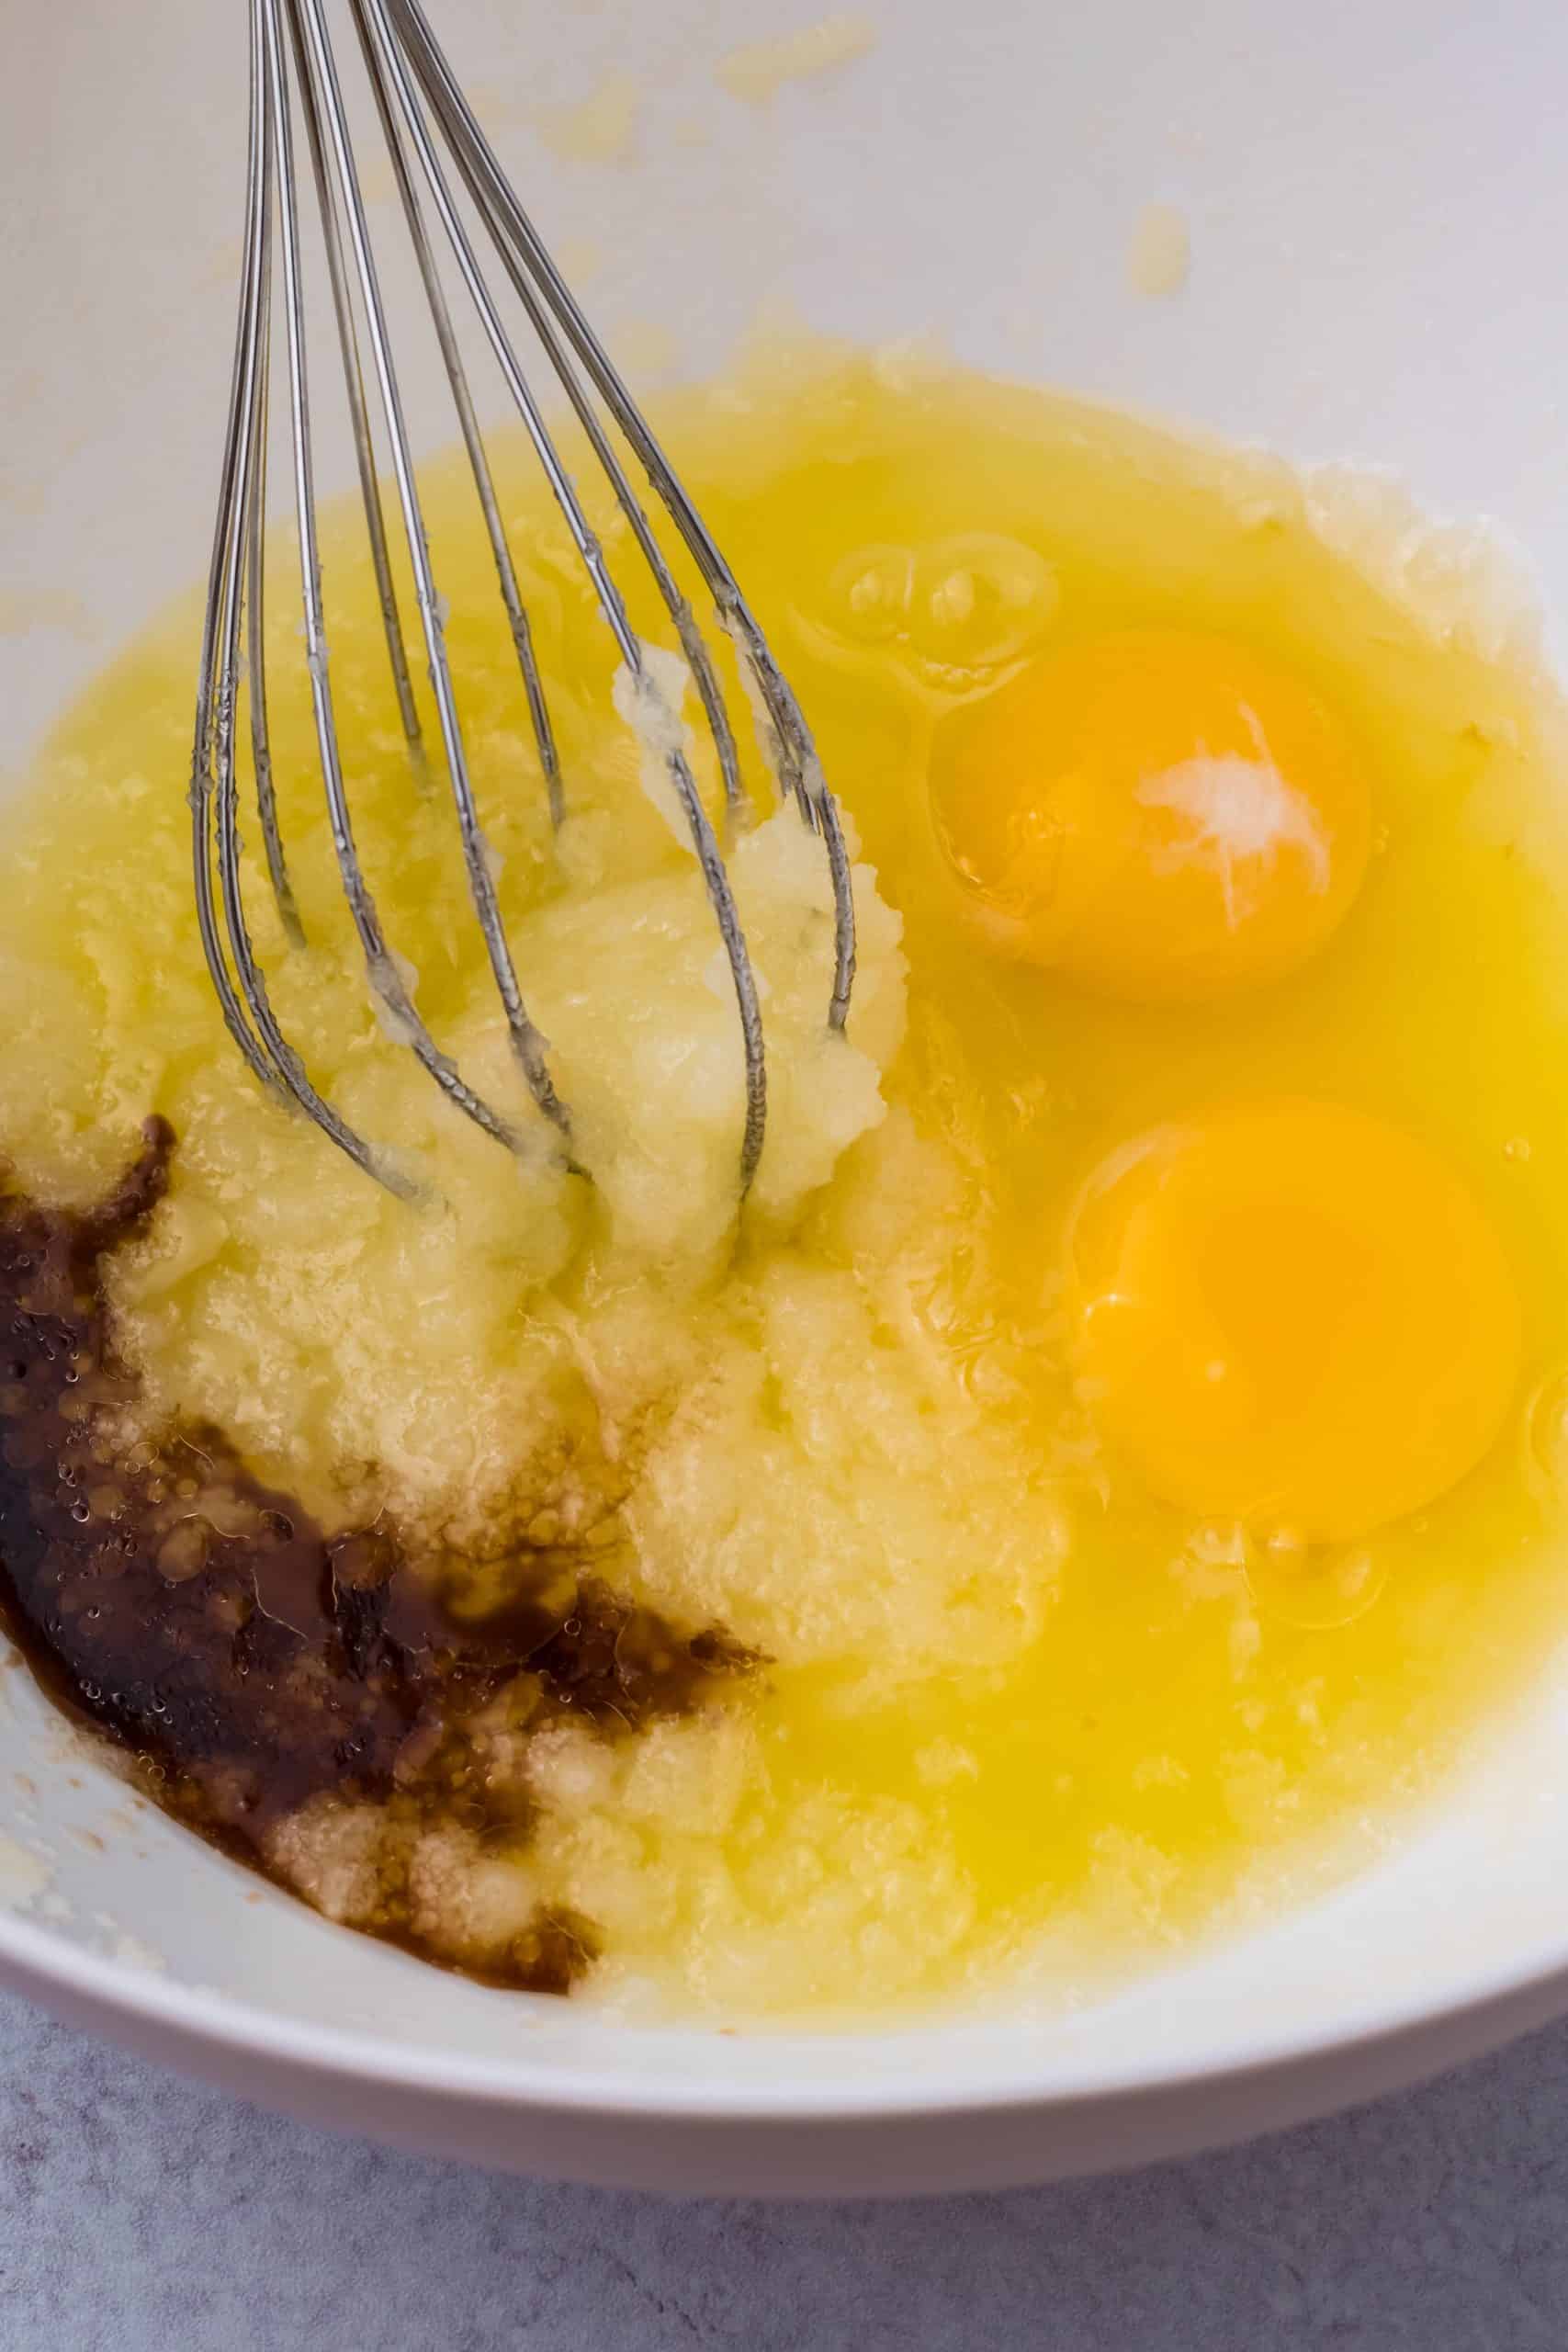 Eggs and vanilla added to sugar and eggs.